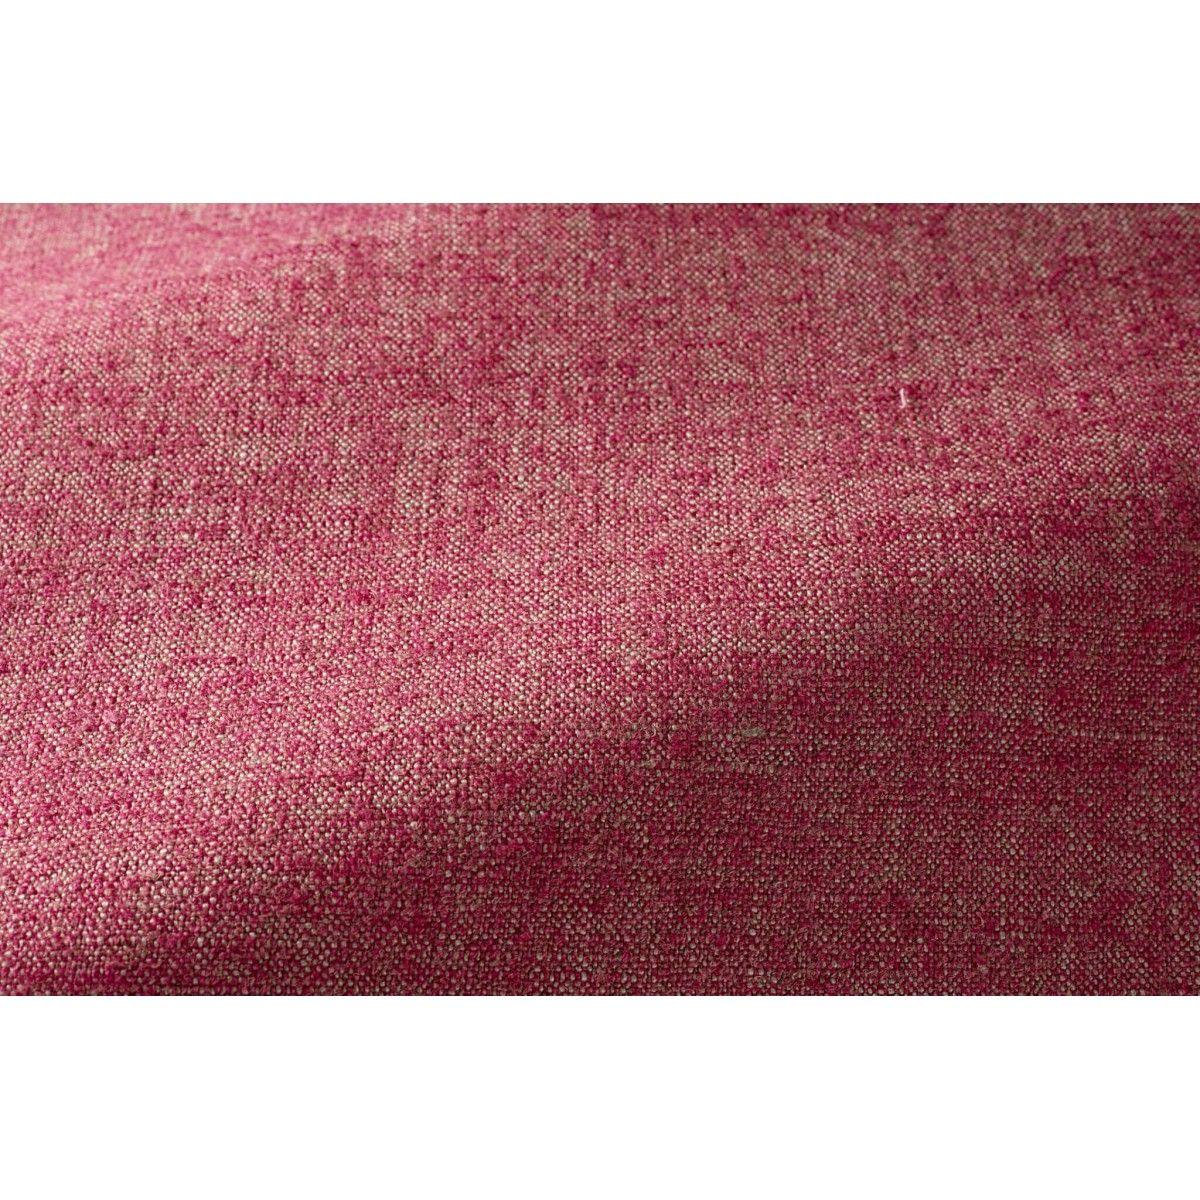 Popus Editions Giovanna 3 Seater Sofa in Fuschia London Linen Fabric.

Giovanna is a sofa with a strong profile. A sober, plush line, with this famous detail that changes everything, so as not to forget its strength of character and this charming